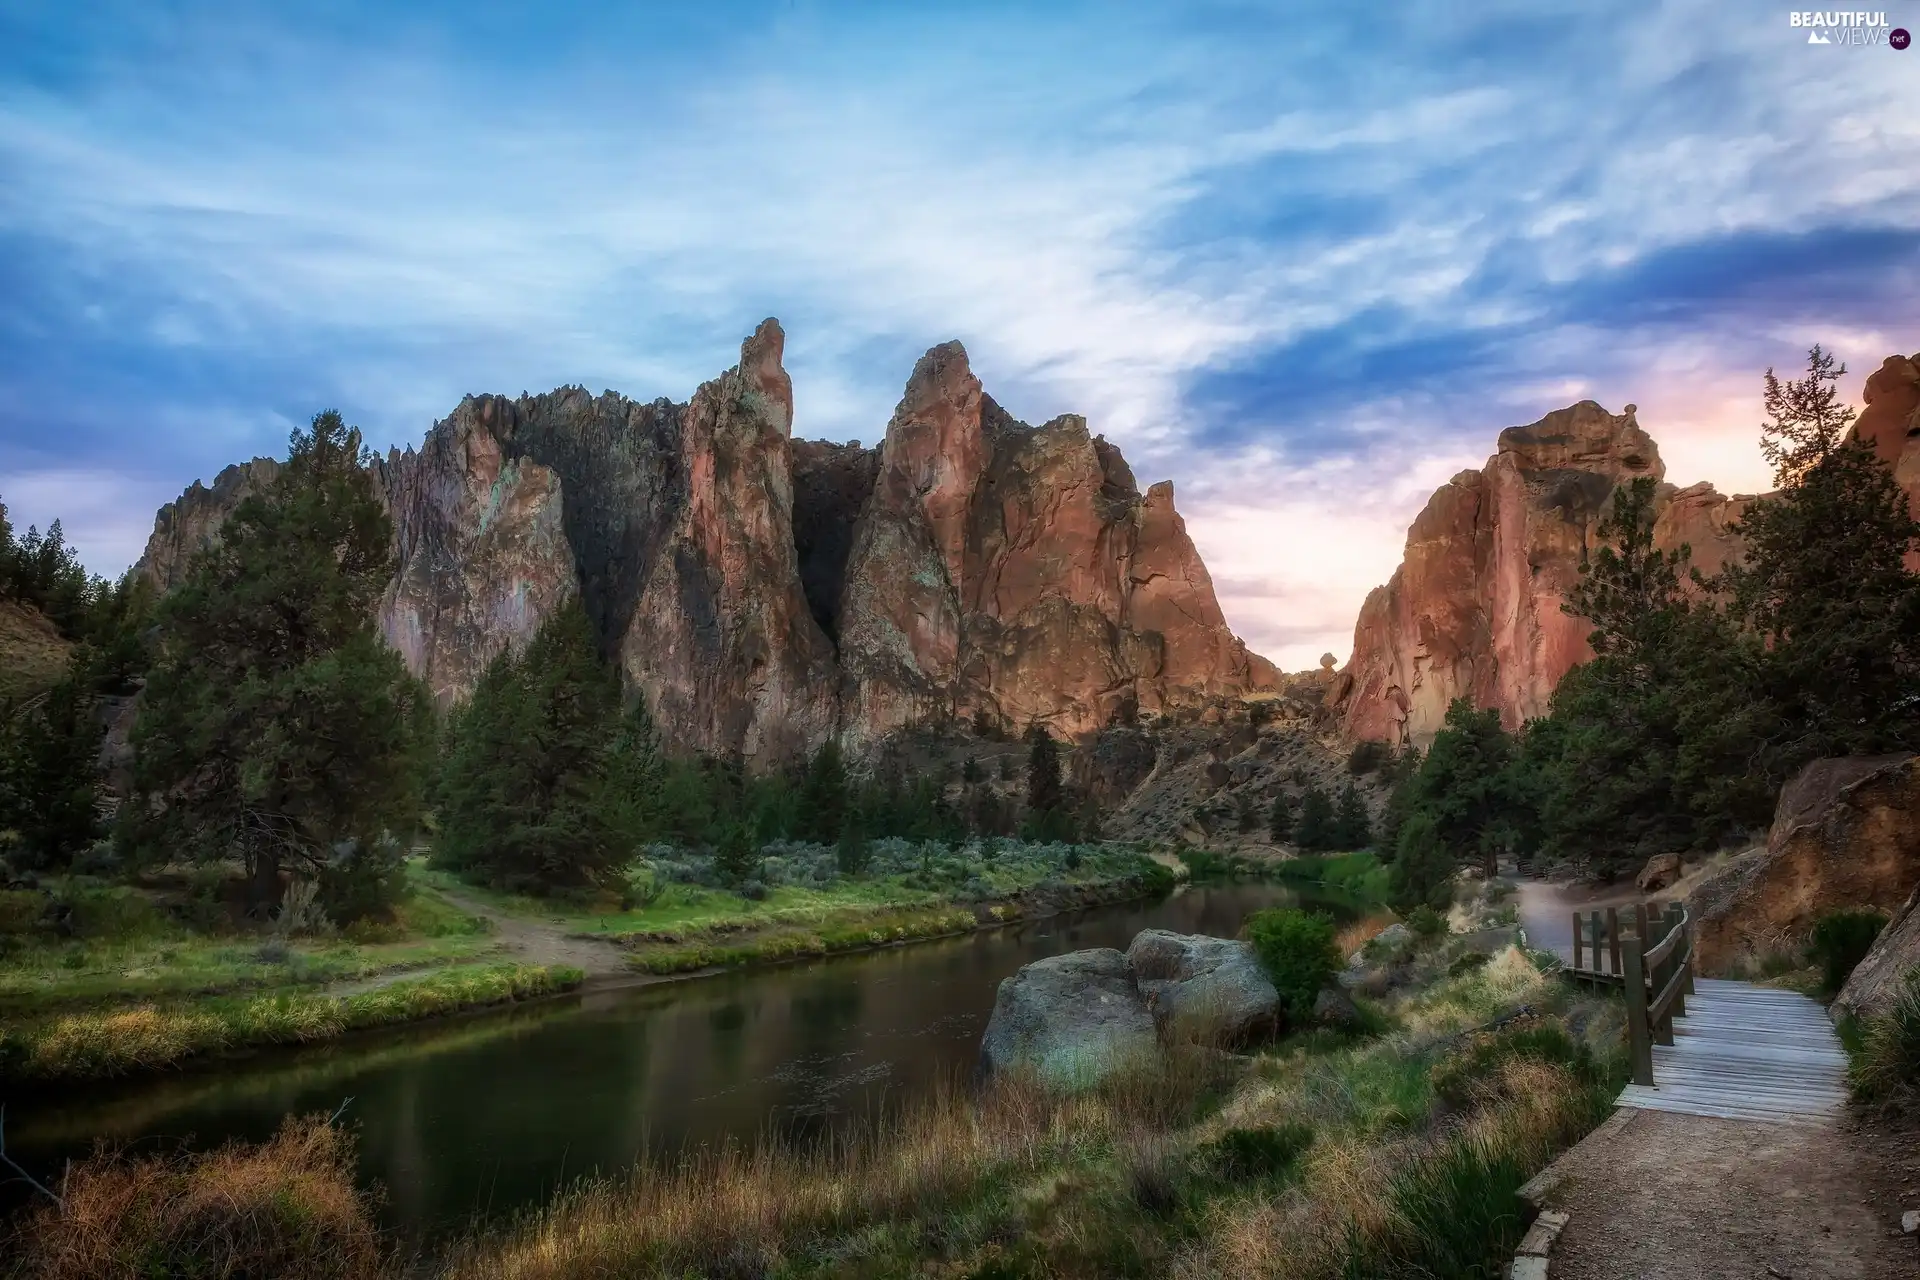 The United States, Crooked River, rocks, State of Oregon, Smith Rock State Park, Path, bridges